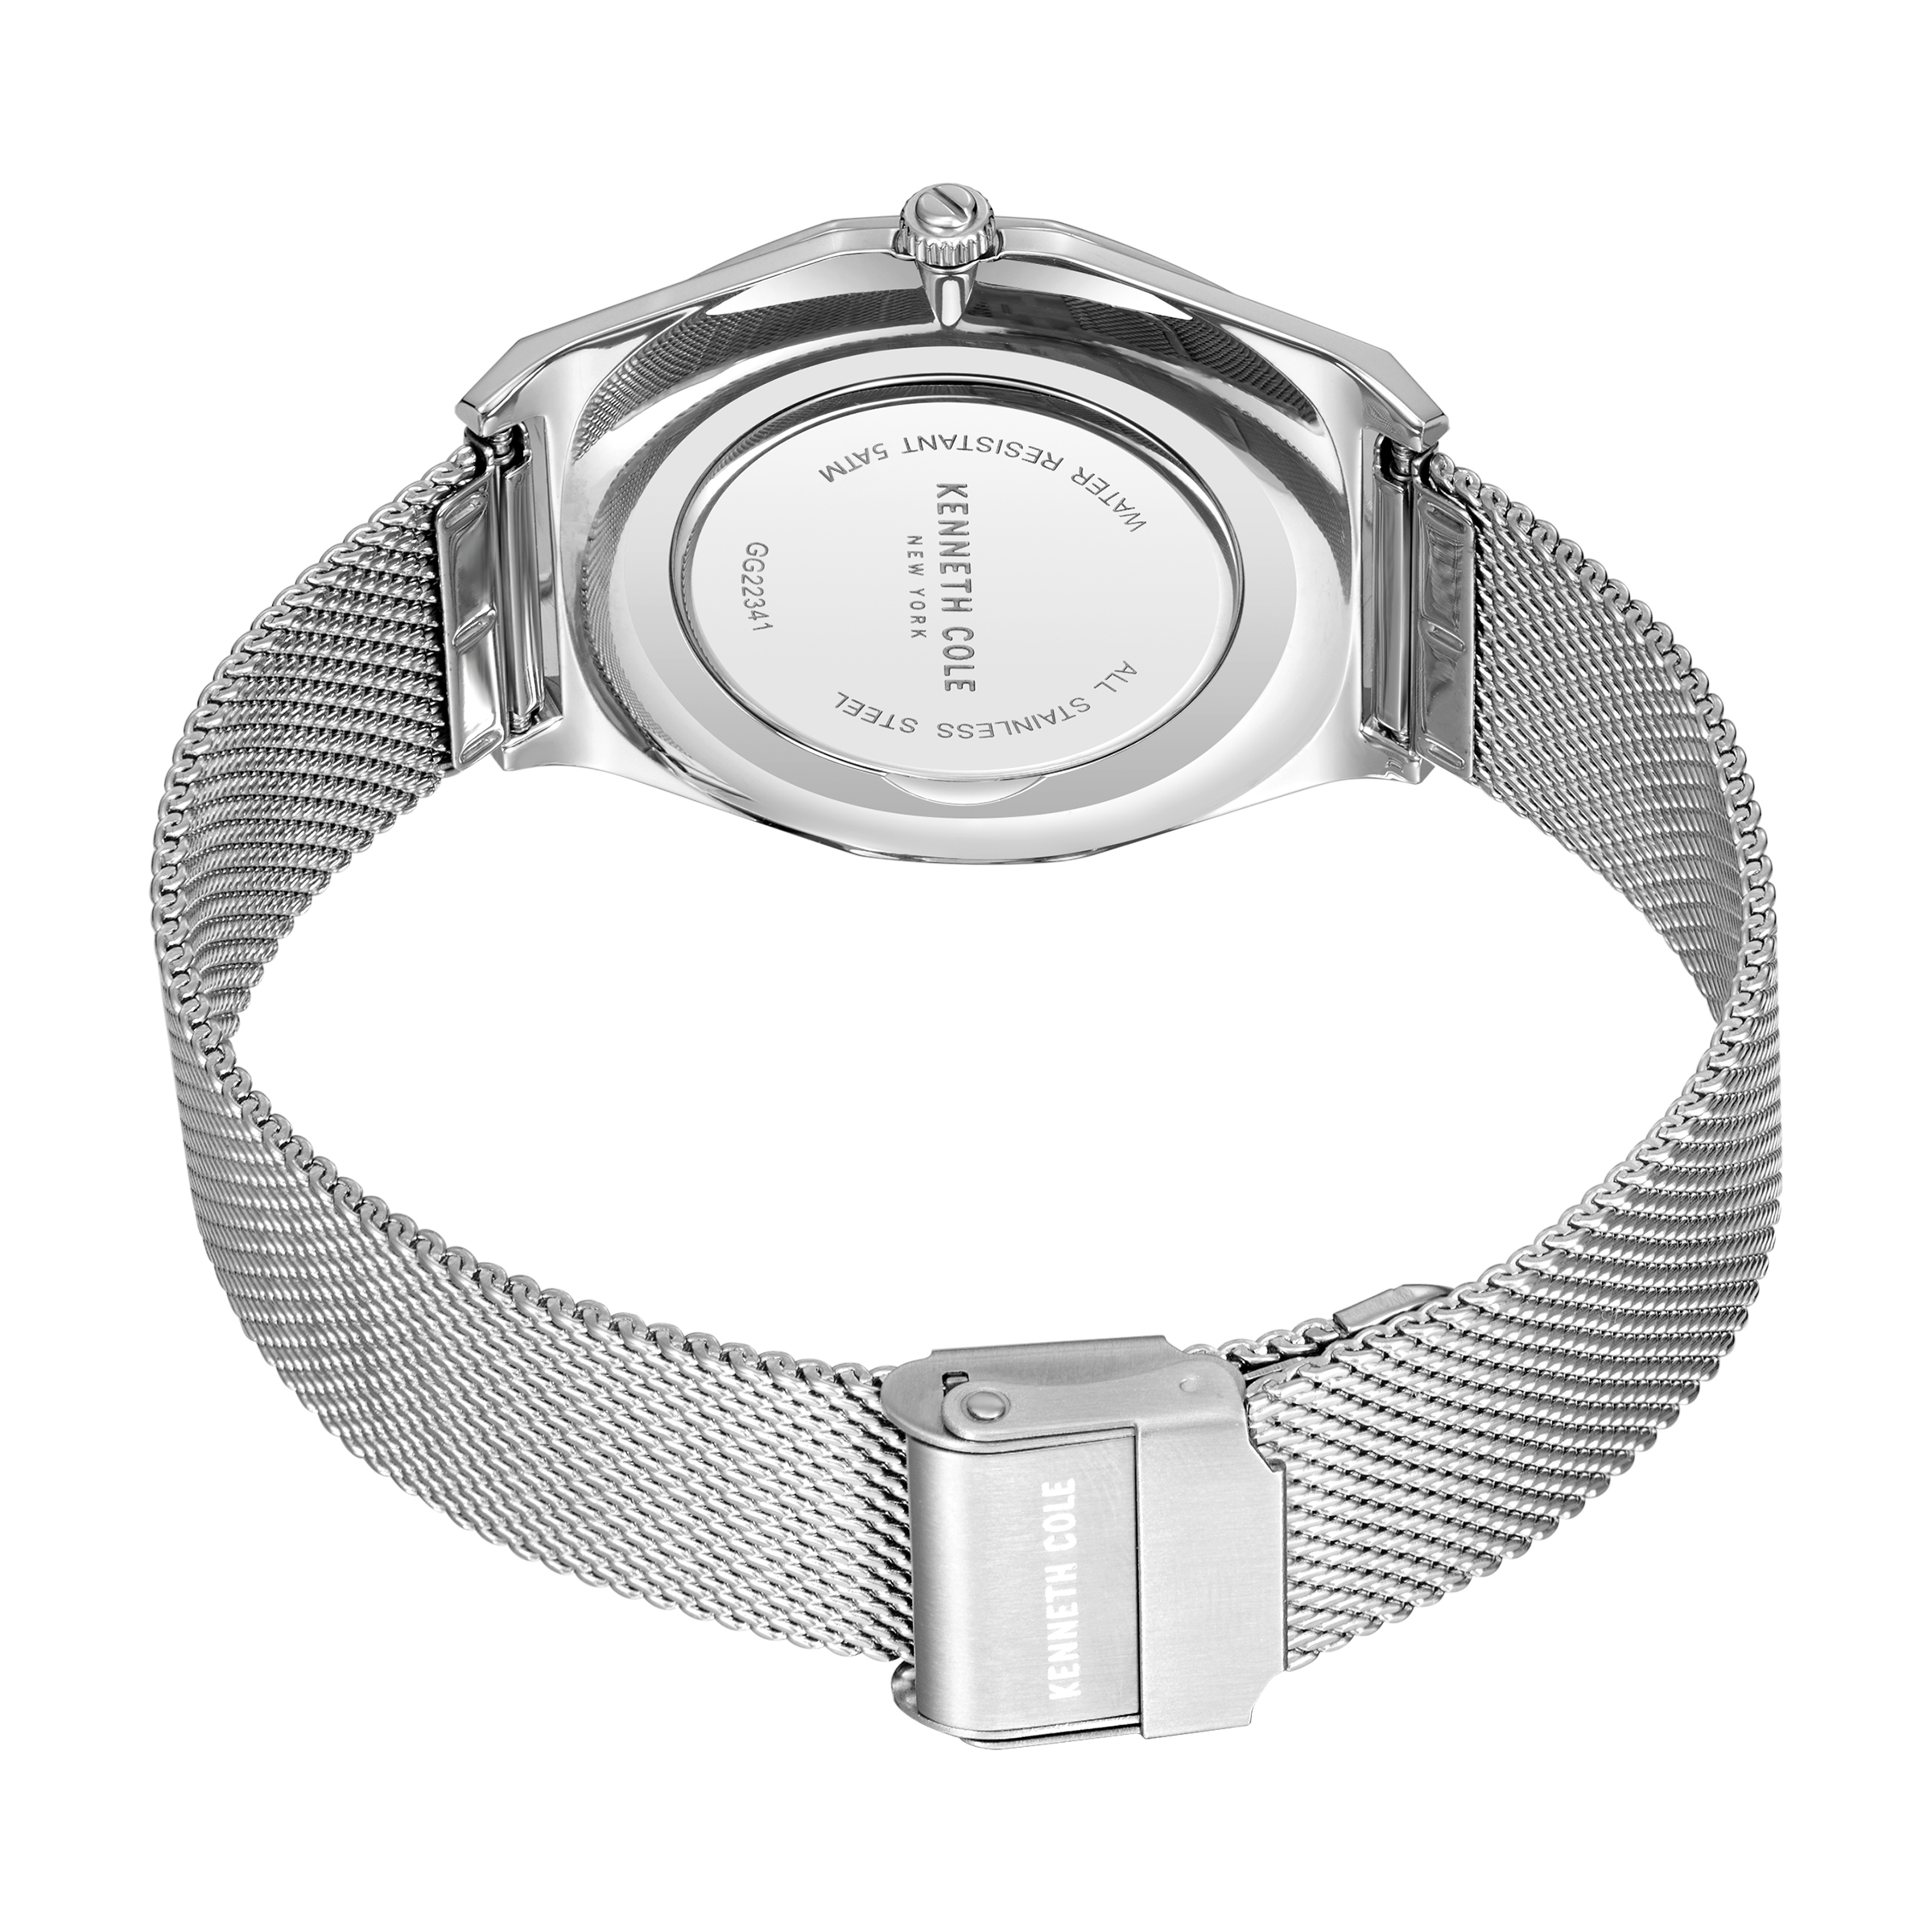 Kenneth Cole New York - KCWGG2234109 - Stainless Steel Wrist Watch for Men